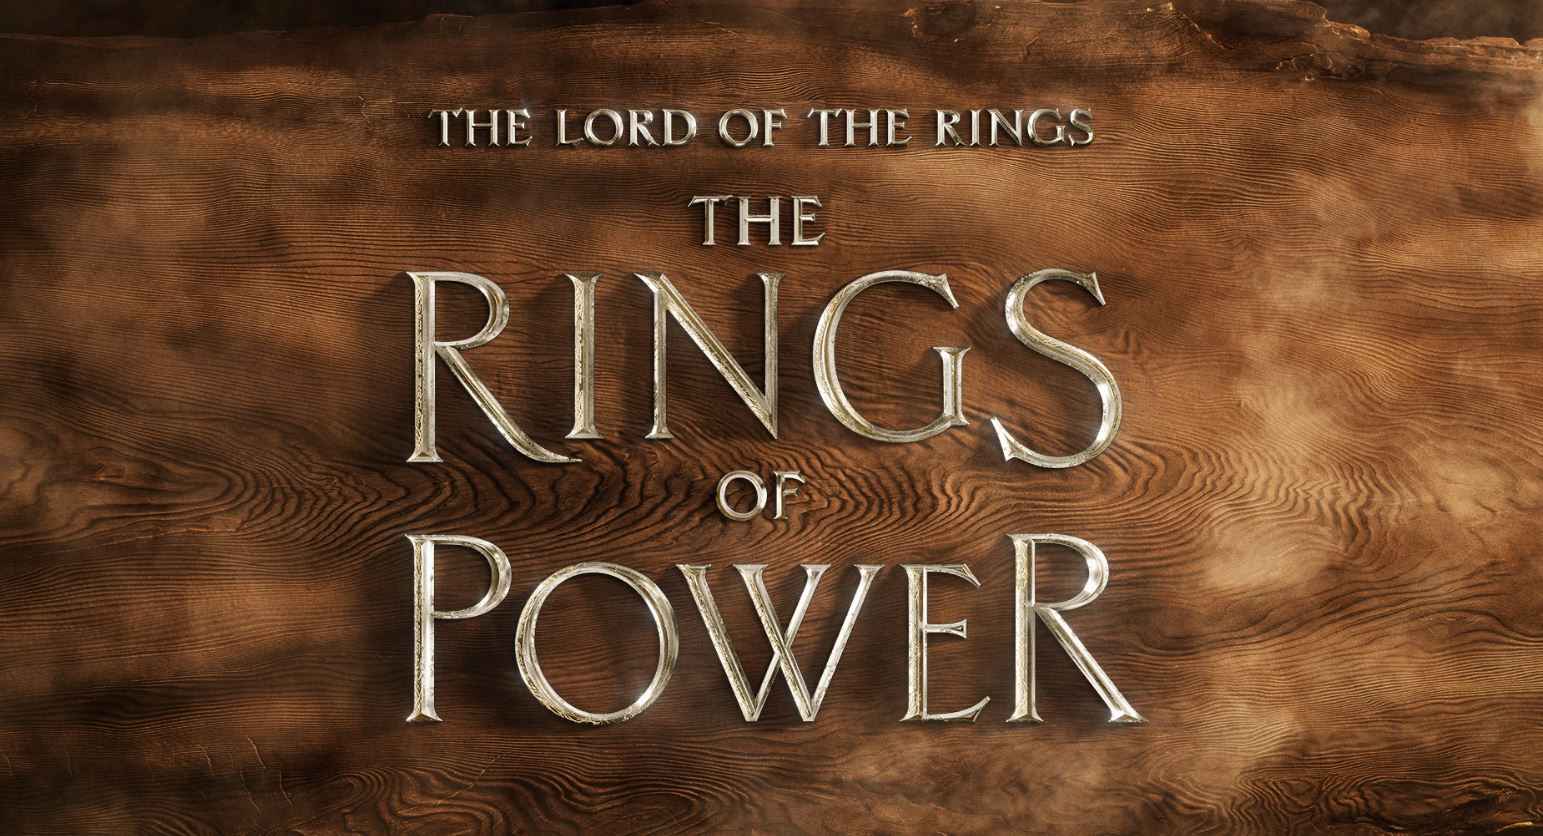 How To Watch The Rings of Power